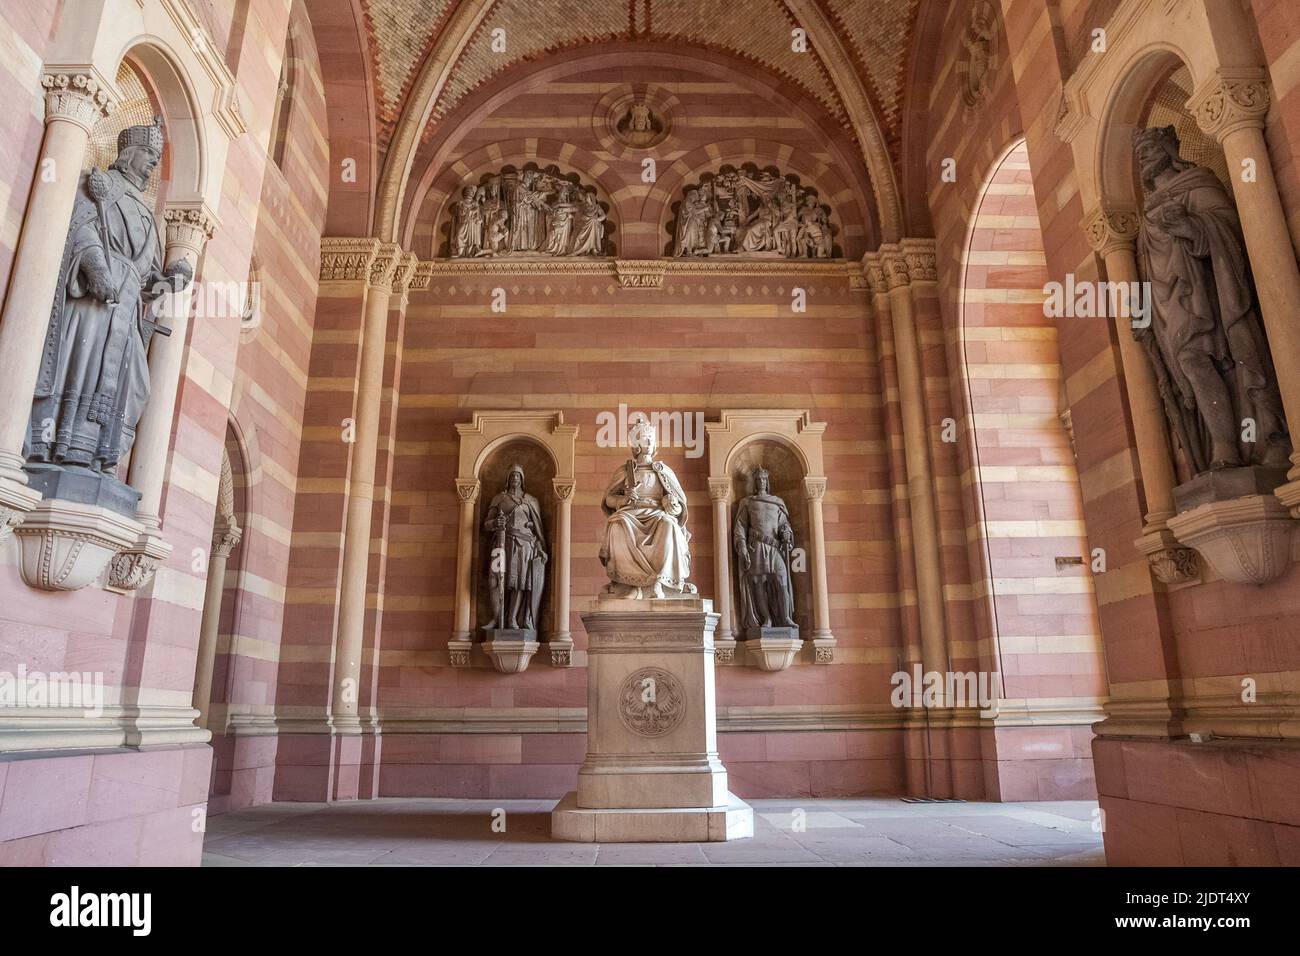 Lovely view of the statue of King Rudolf I of Habsburg in the narthex of the famous Speyer Cathedral in Rhineland-Palatinate, Germany. The monument... Stock Photo